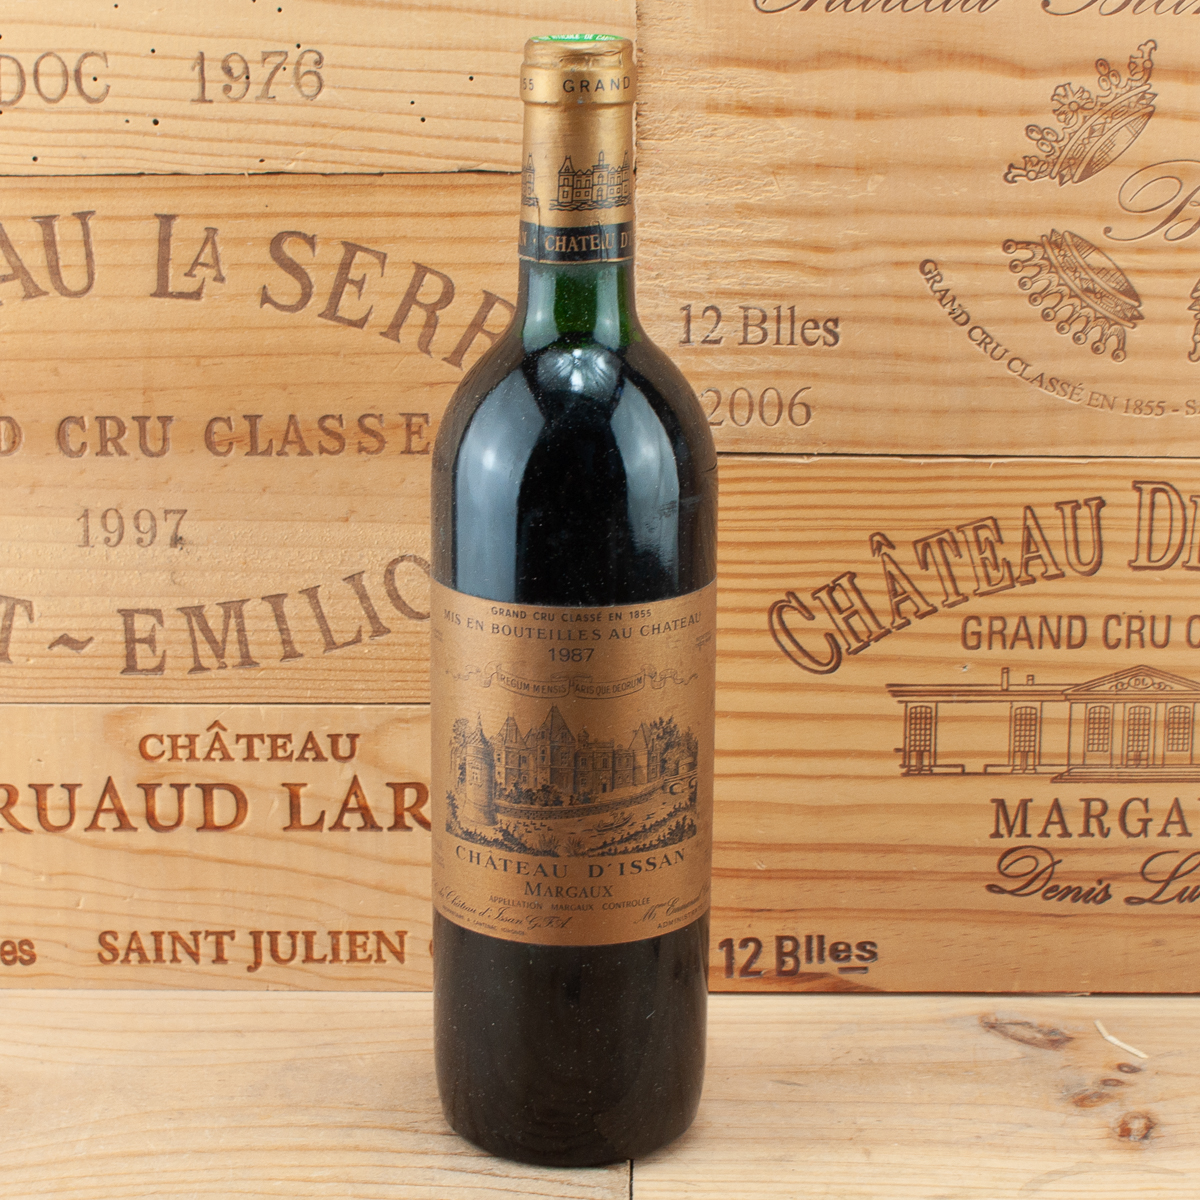 1987 Chateau d'Issan